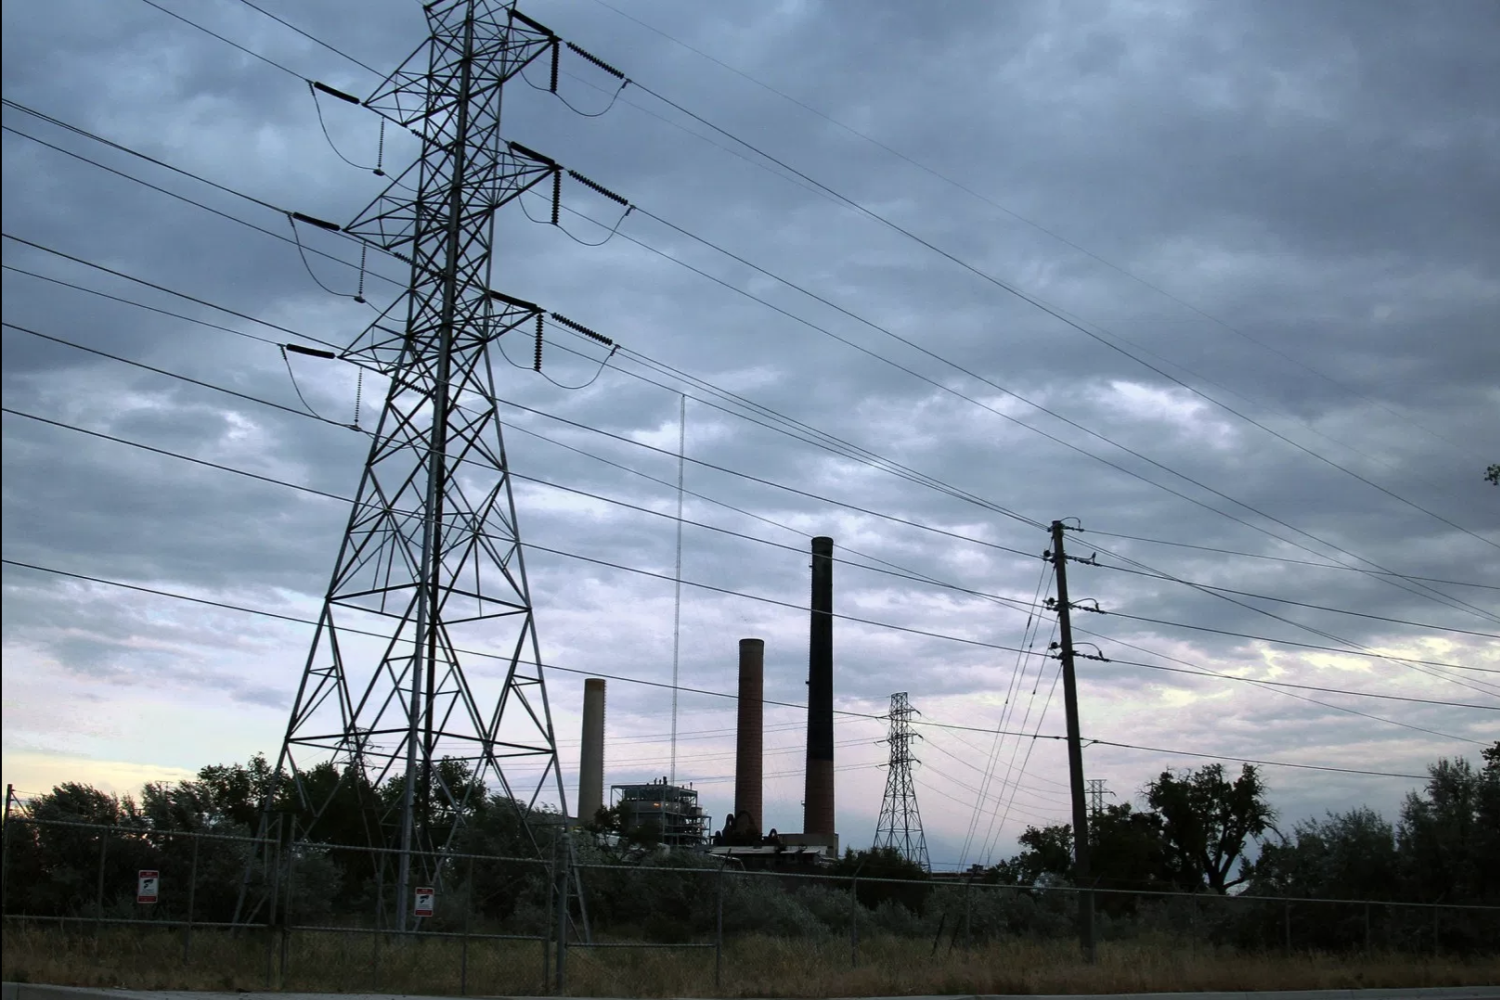 The Valmont Station stands surrounded by powerlines and other environment-polluting locations. Waste from these locations will often leak into the ground and ruin the ground water. Coal ash is also impossible to clean up and contains lead, arsenic and mercury.